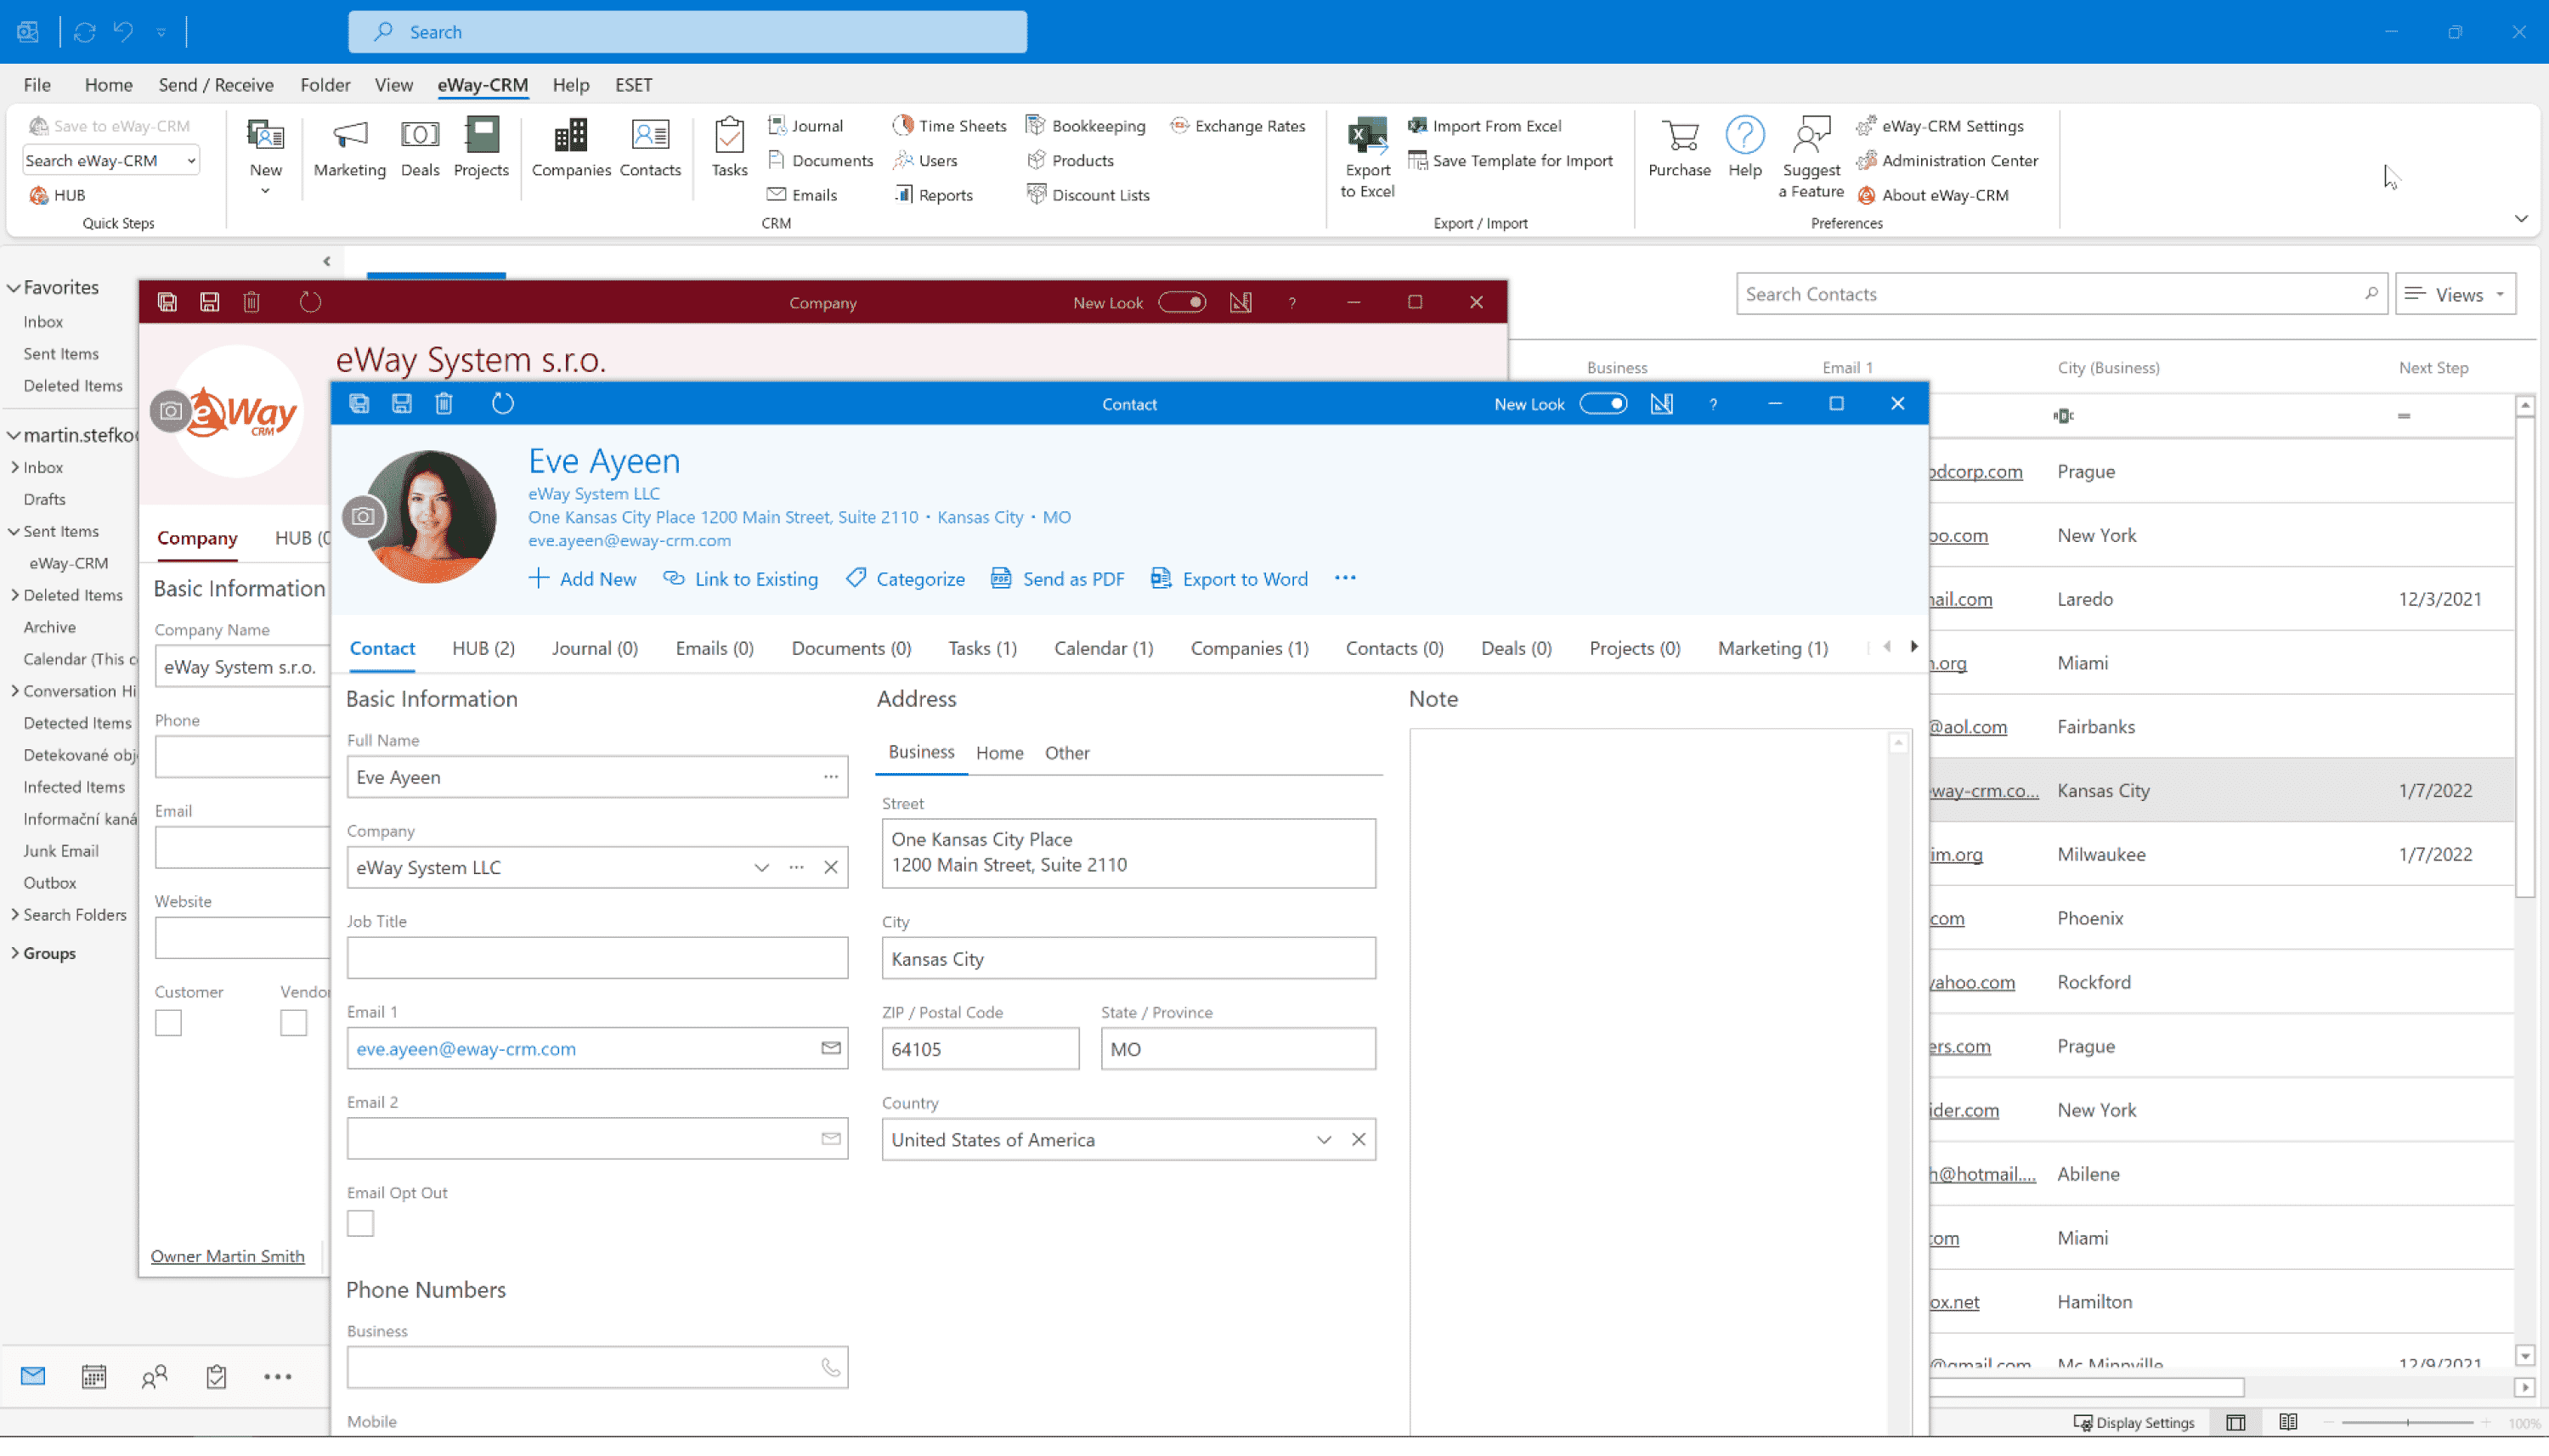 eWay-CRM - Best CRM for Outlook